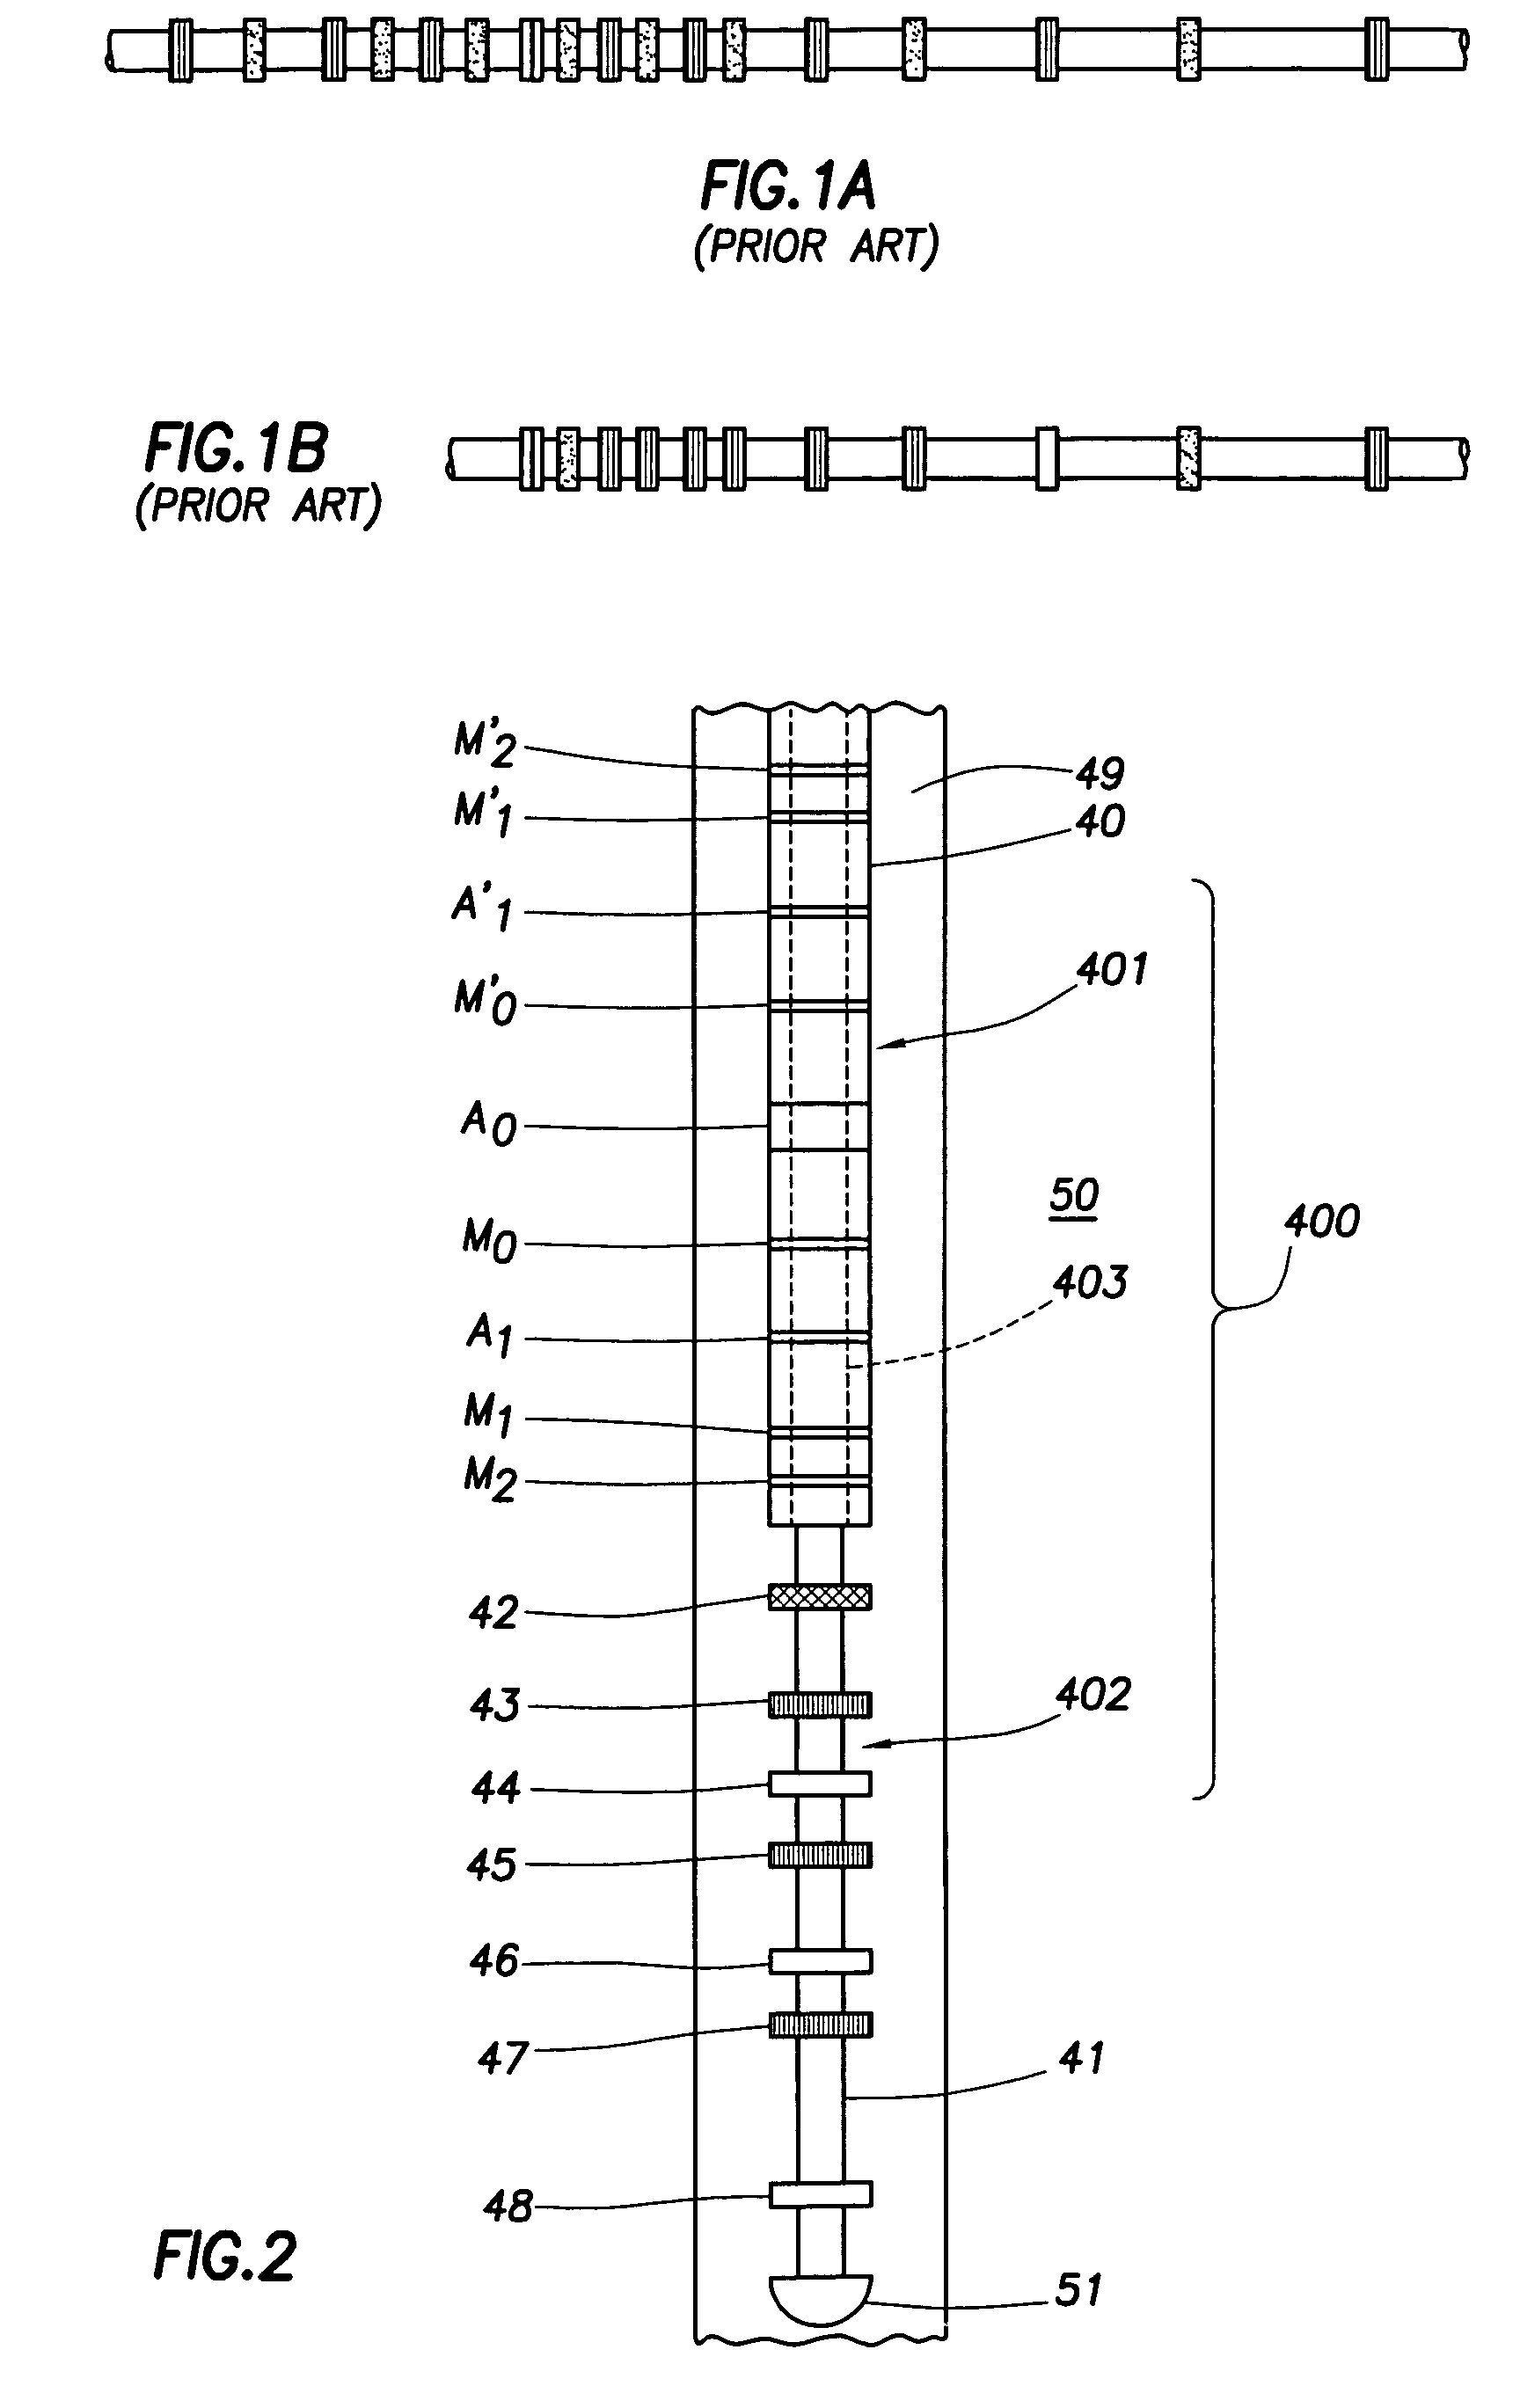 Apparatus and methods for induction-SFL logging